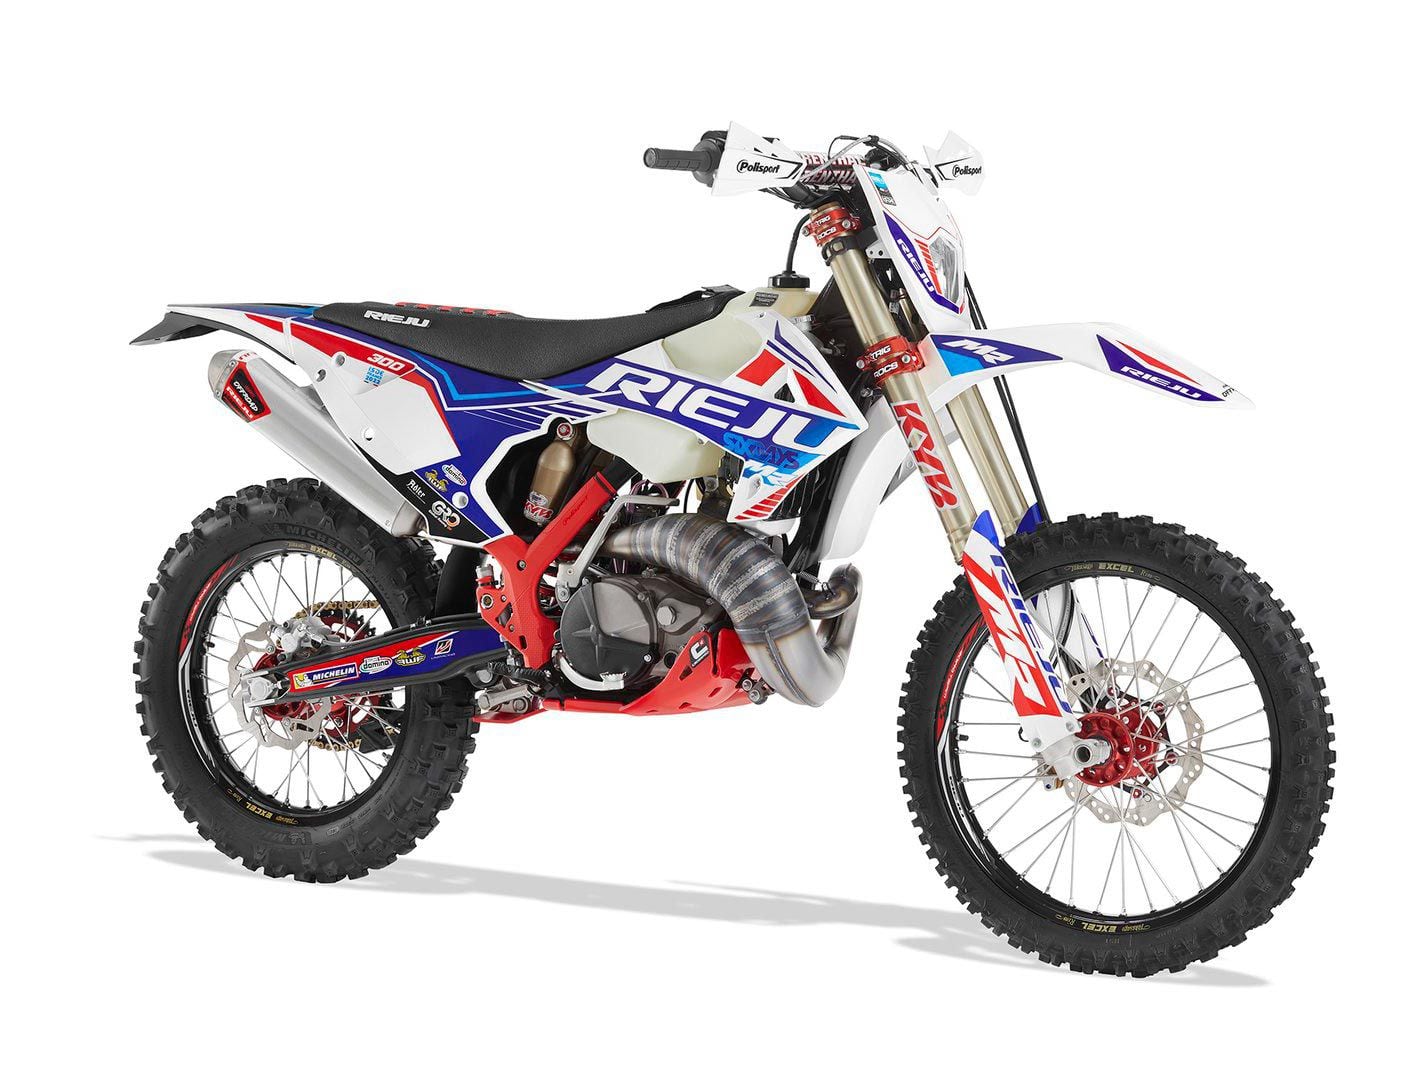 Top-shelf goodies and ISDE-inspired livery make up the limited-edition 2023 Rieju MR Six Days 300.